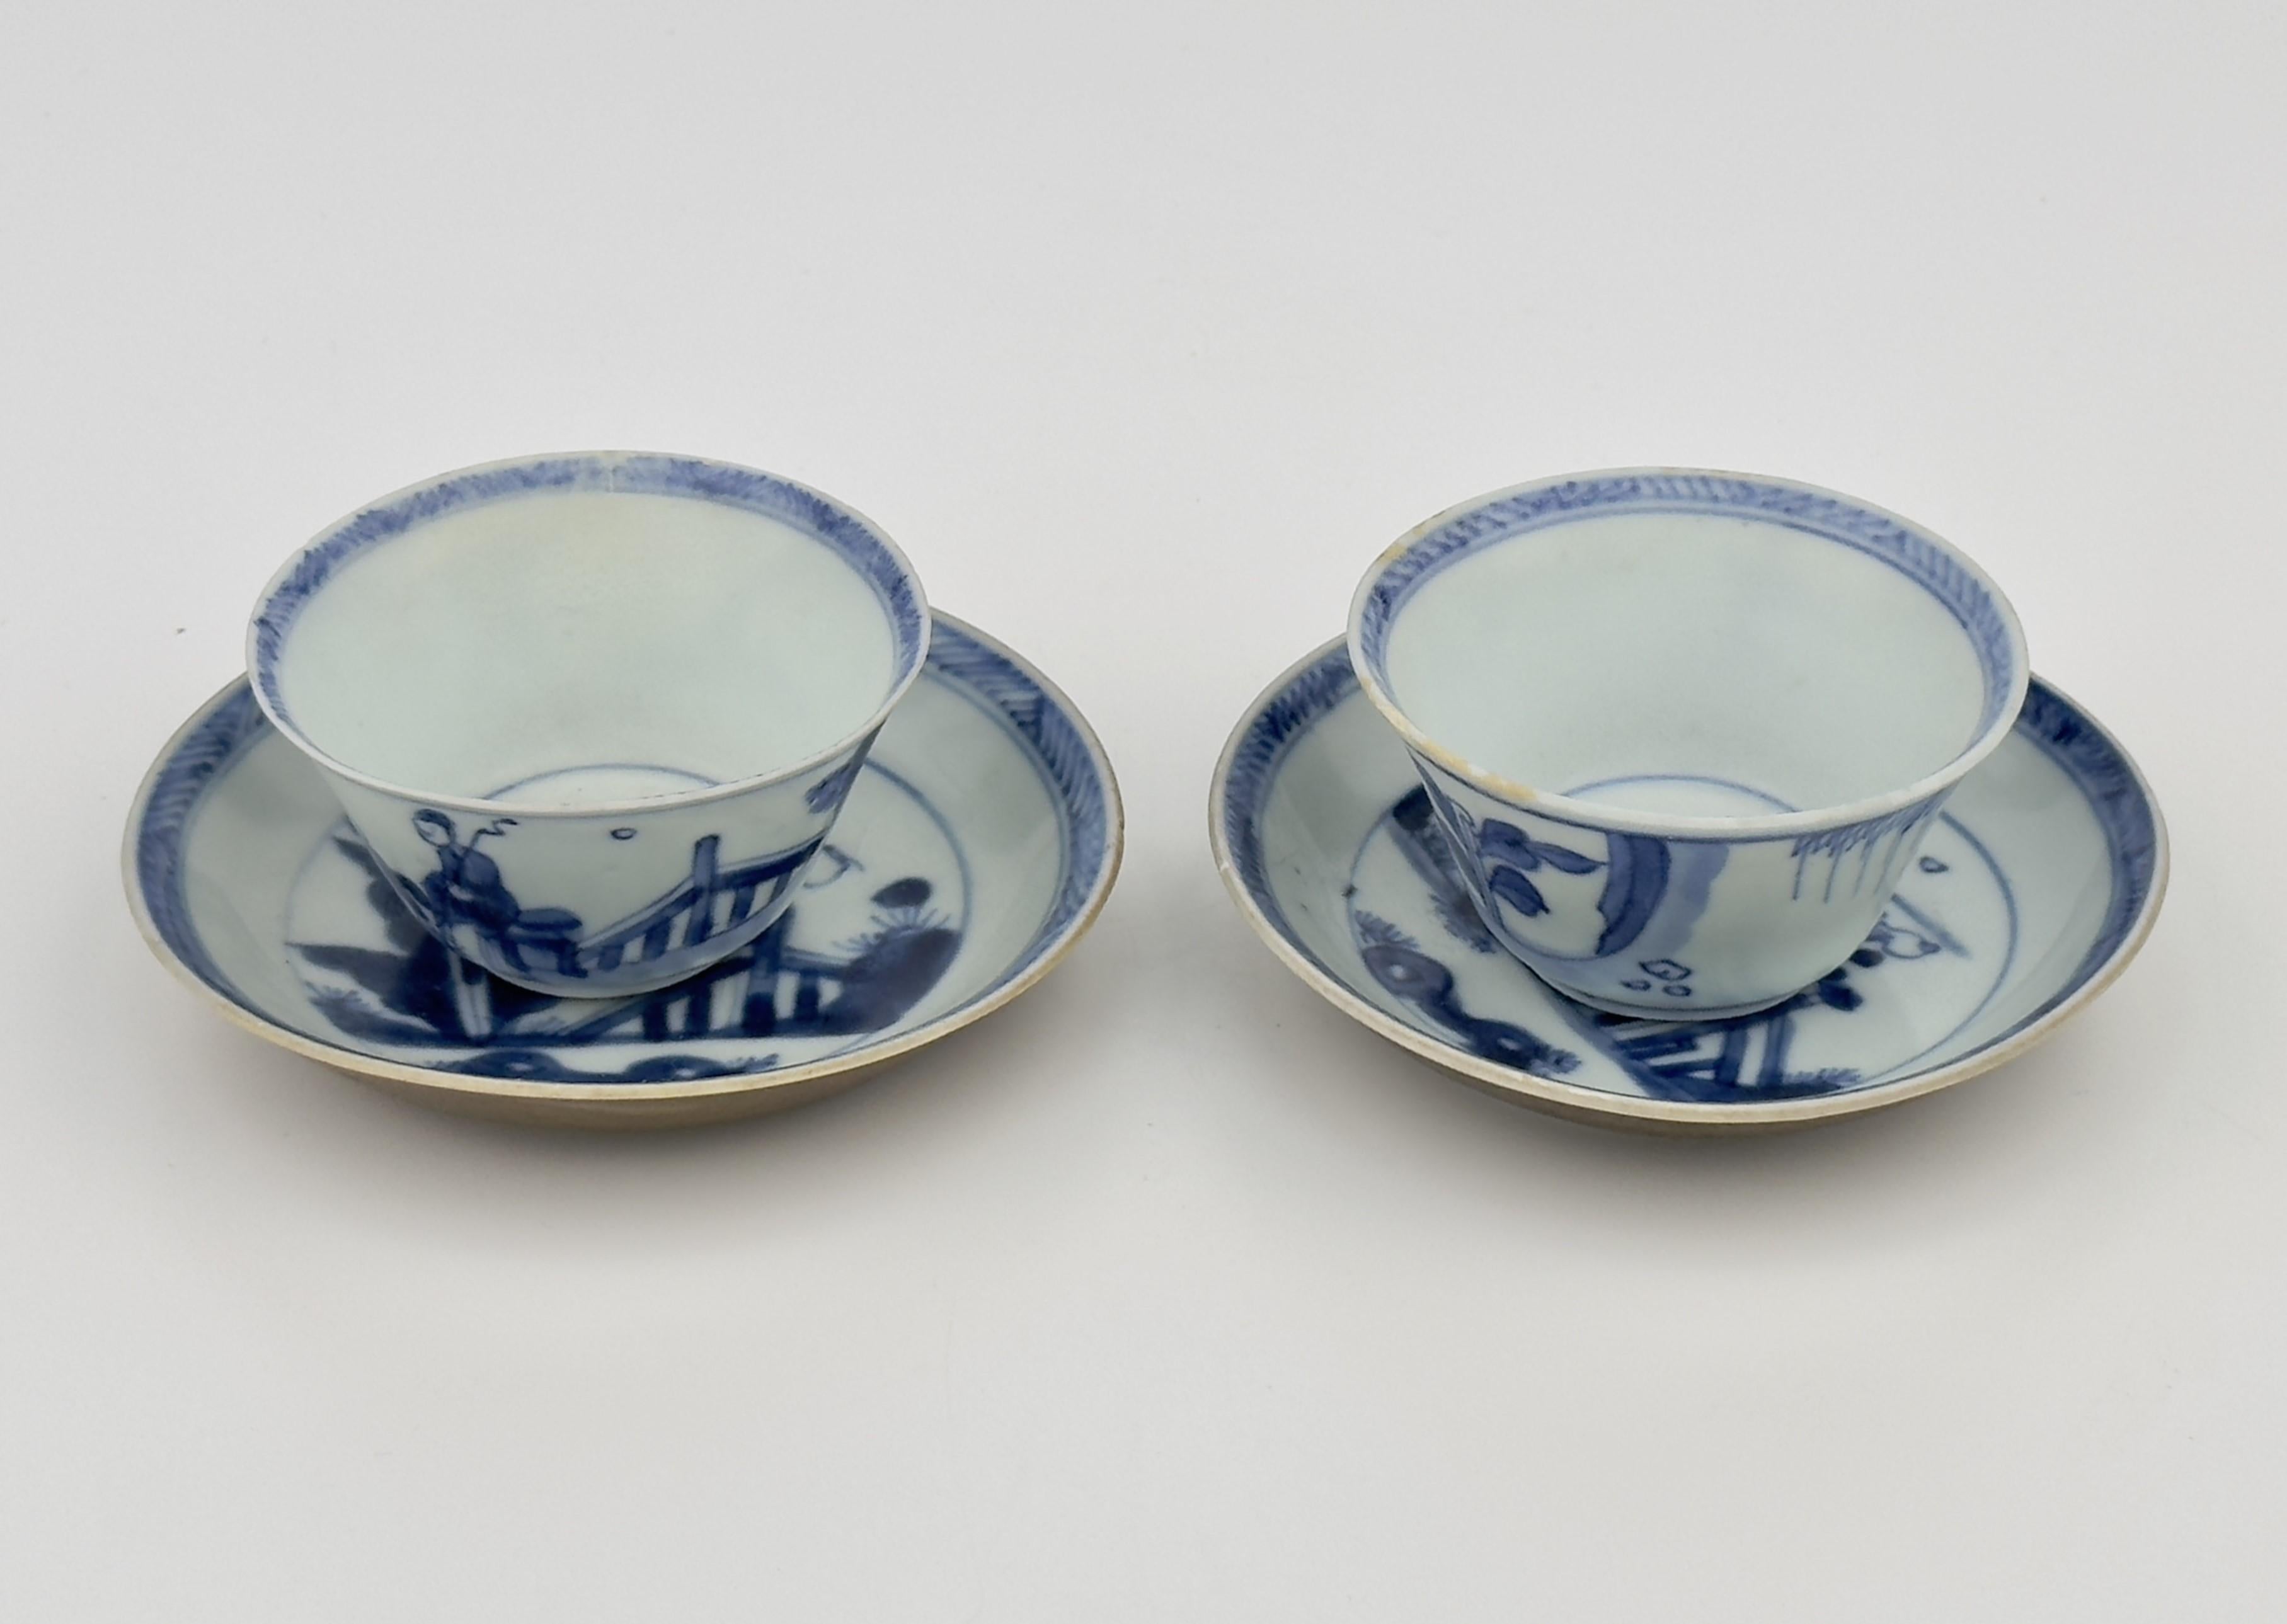 Glazed Blue and White Tea Set c 1725, Qing Dynasty, Yongzheng Reign For Sale